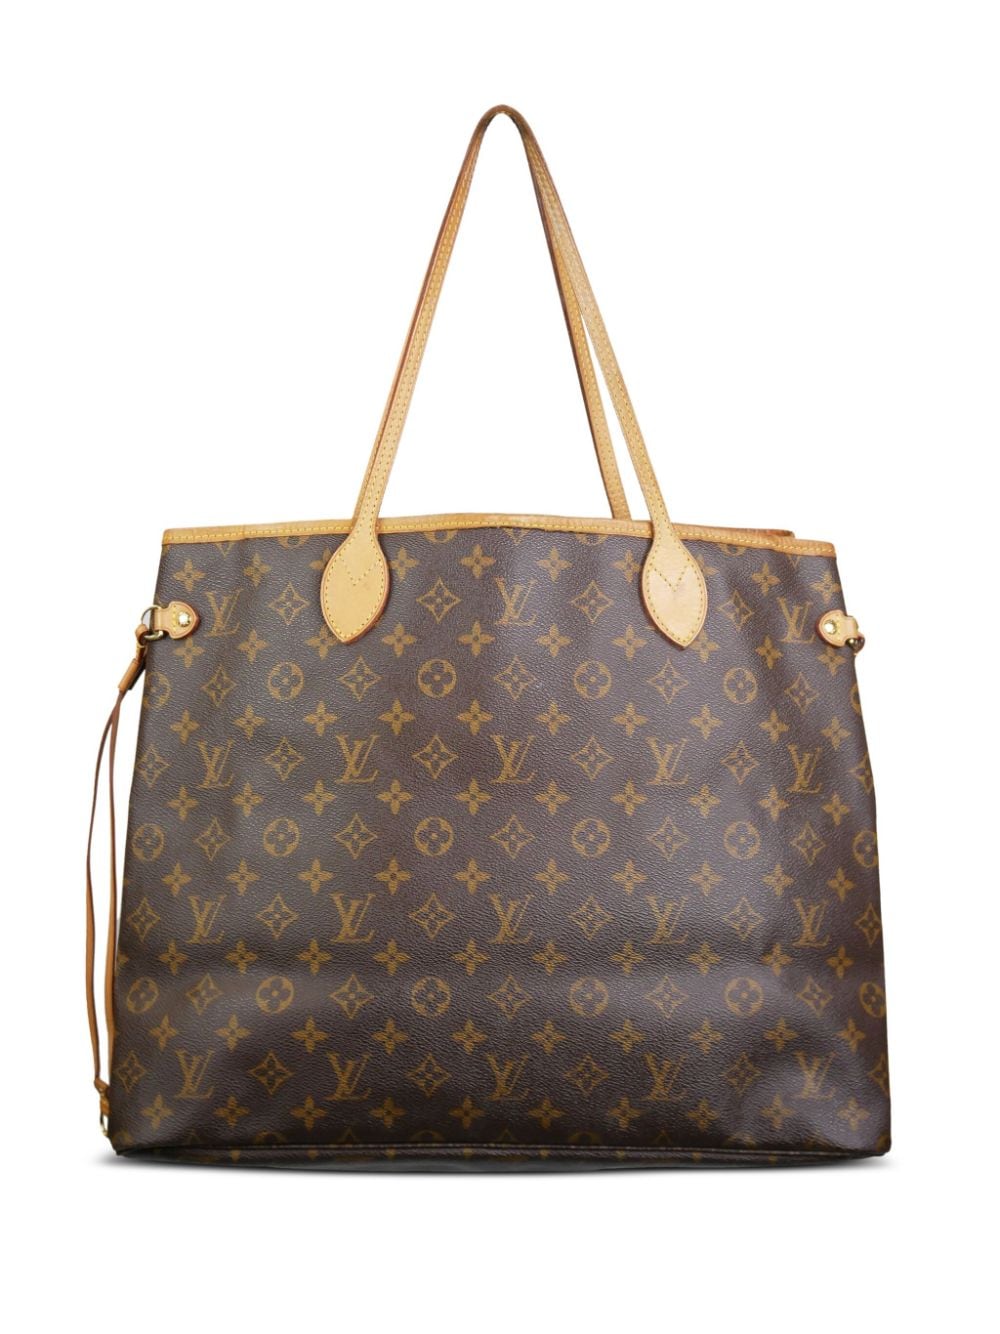 Louis Vuitton 2008 pre-owned Neverfull Tote Bag - Farfetch